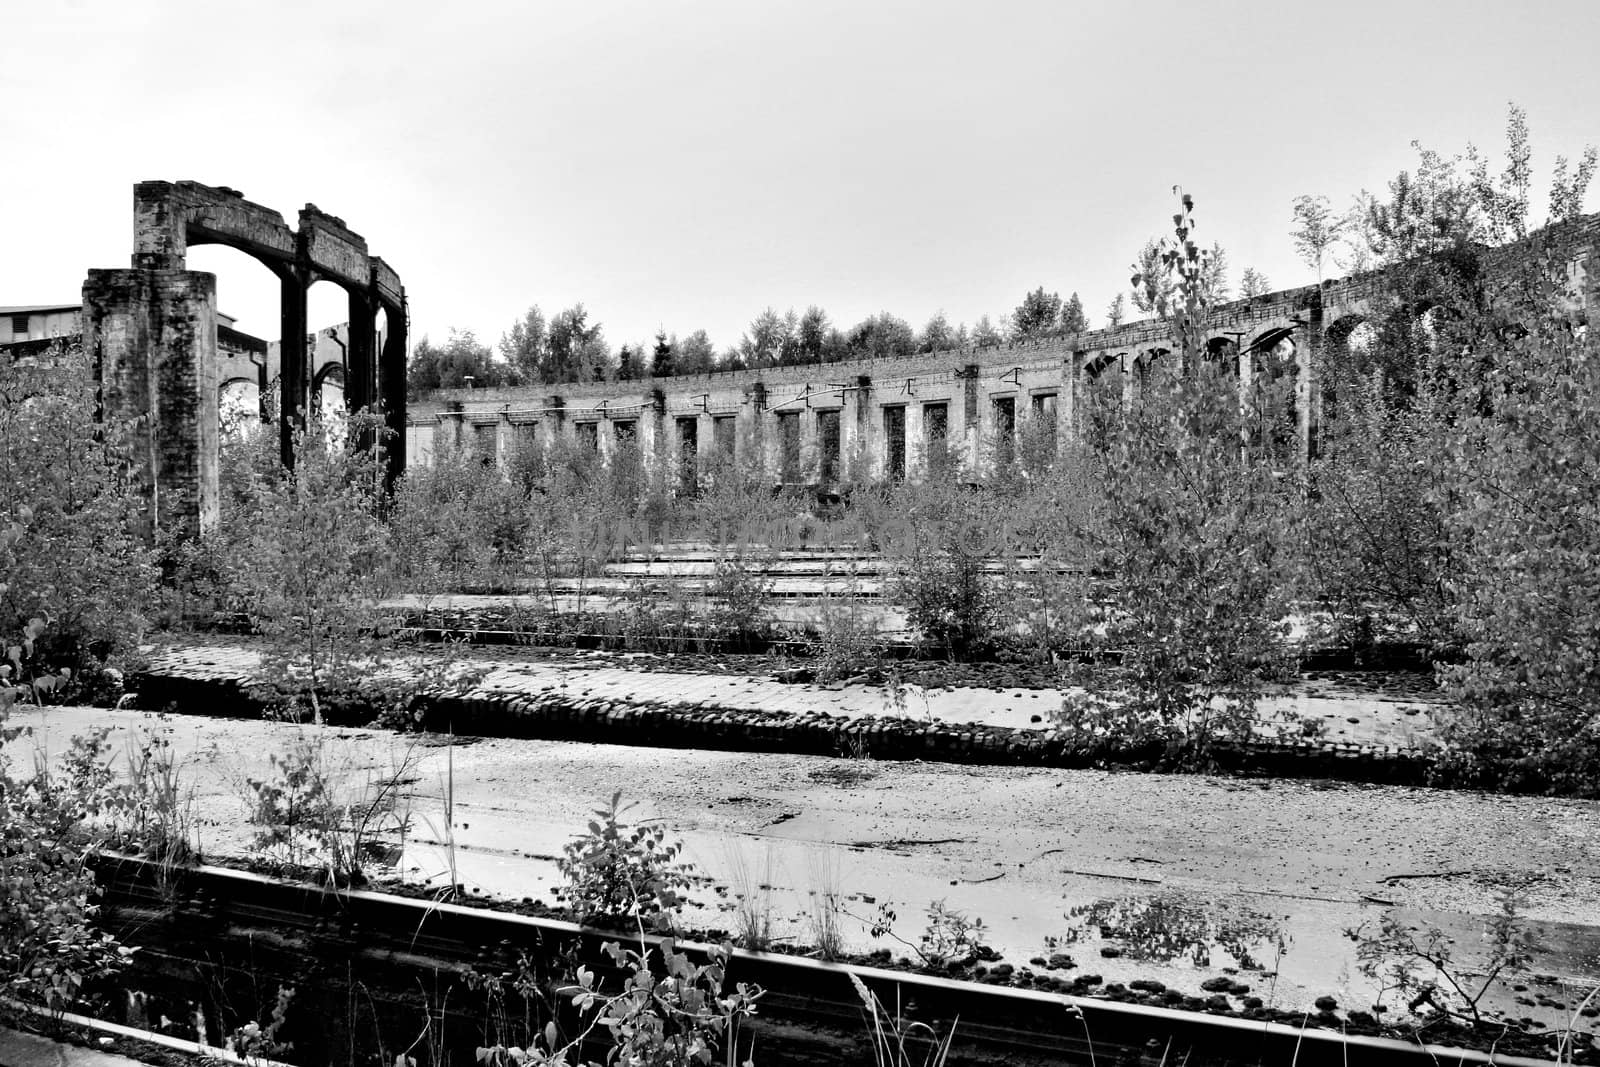 Rotting ruin of an industrial building, the remains of a huge round locomotive shed, which was destroyed by a fire. Totally abandoned area, plants growing everywhere. 